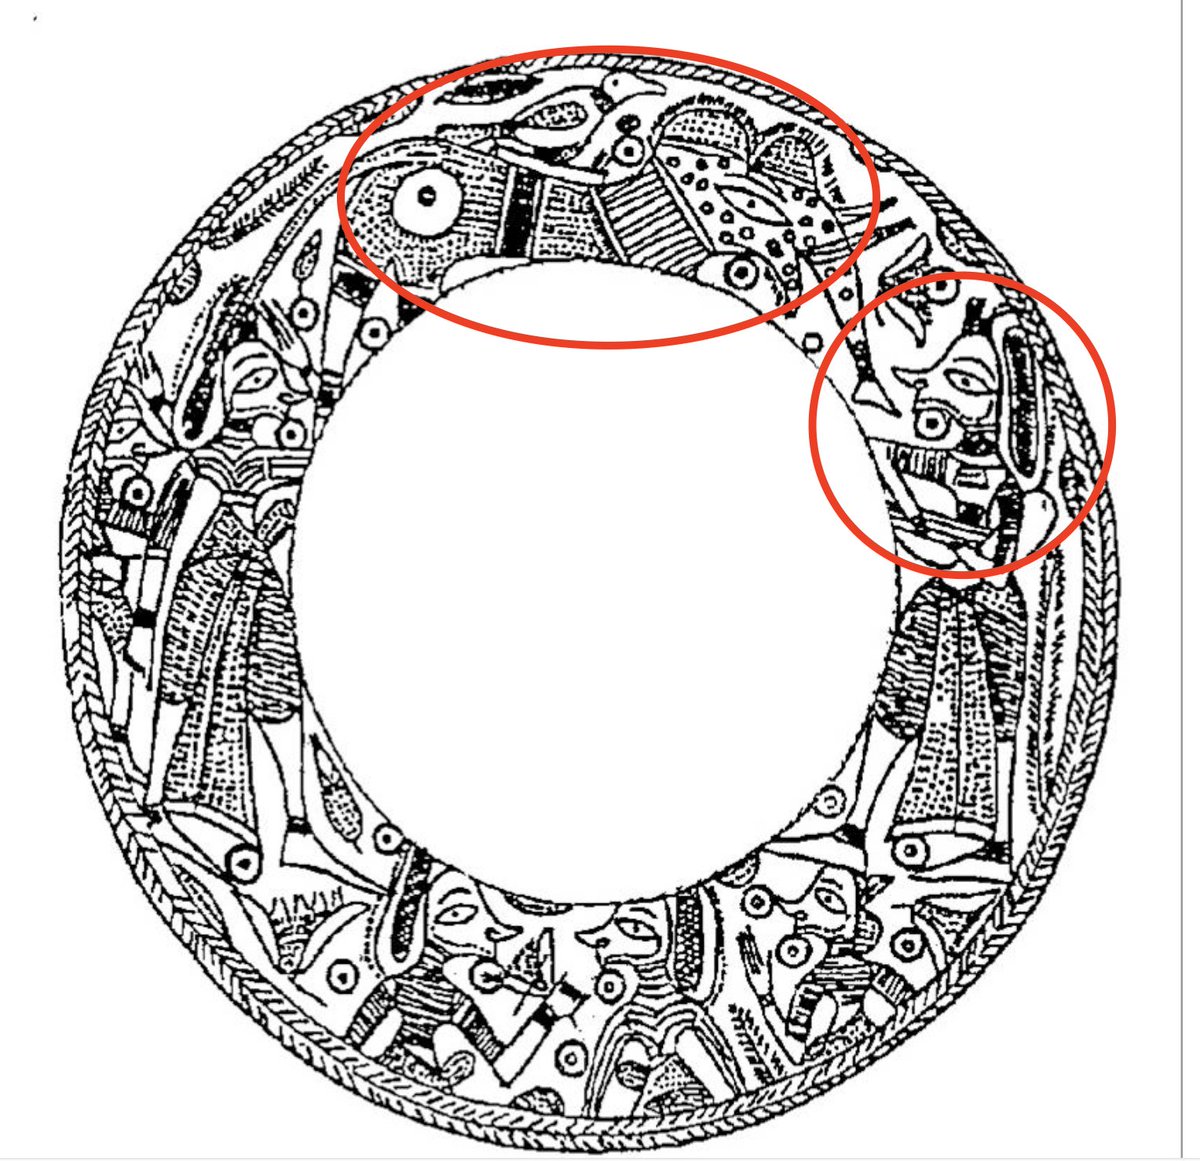 One additional hint - Look at the elephant dot. On his tail. This dot is exactly found in some Jaina representations. I think we can be sure these mirrors were made by Indian craftsmen now. (as  @anilksuri said, the technology would be a trade secret & not likely to be shared)